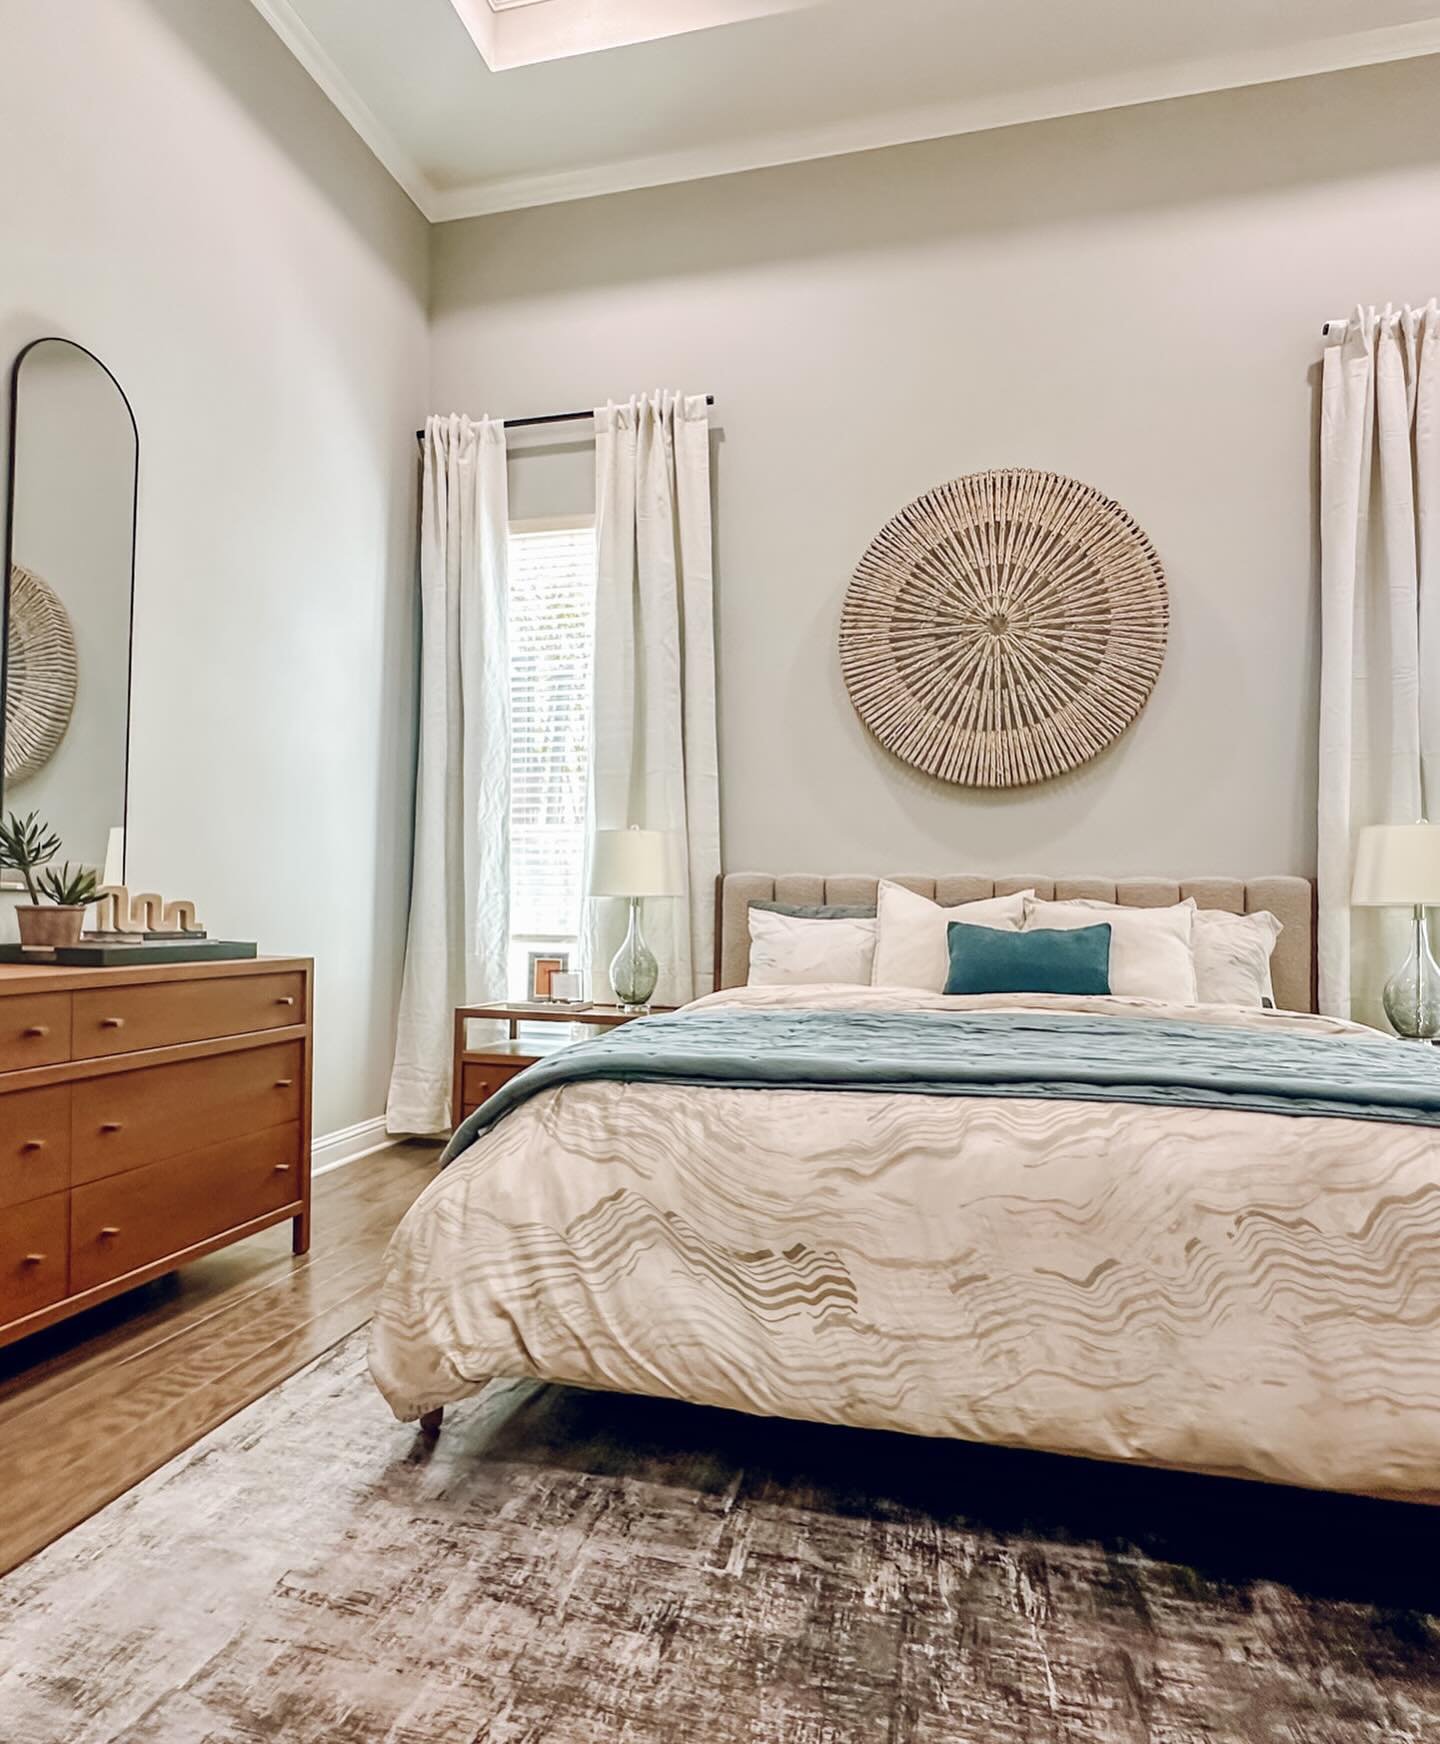 Your bedroom should be a place of retreat and refuge, so why is it usually one of the last spaces we decorate? 
.
Not anymore! Check out this relaxing transformation. So serene and calming.